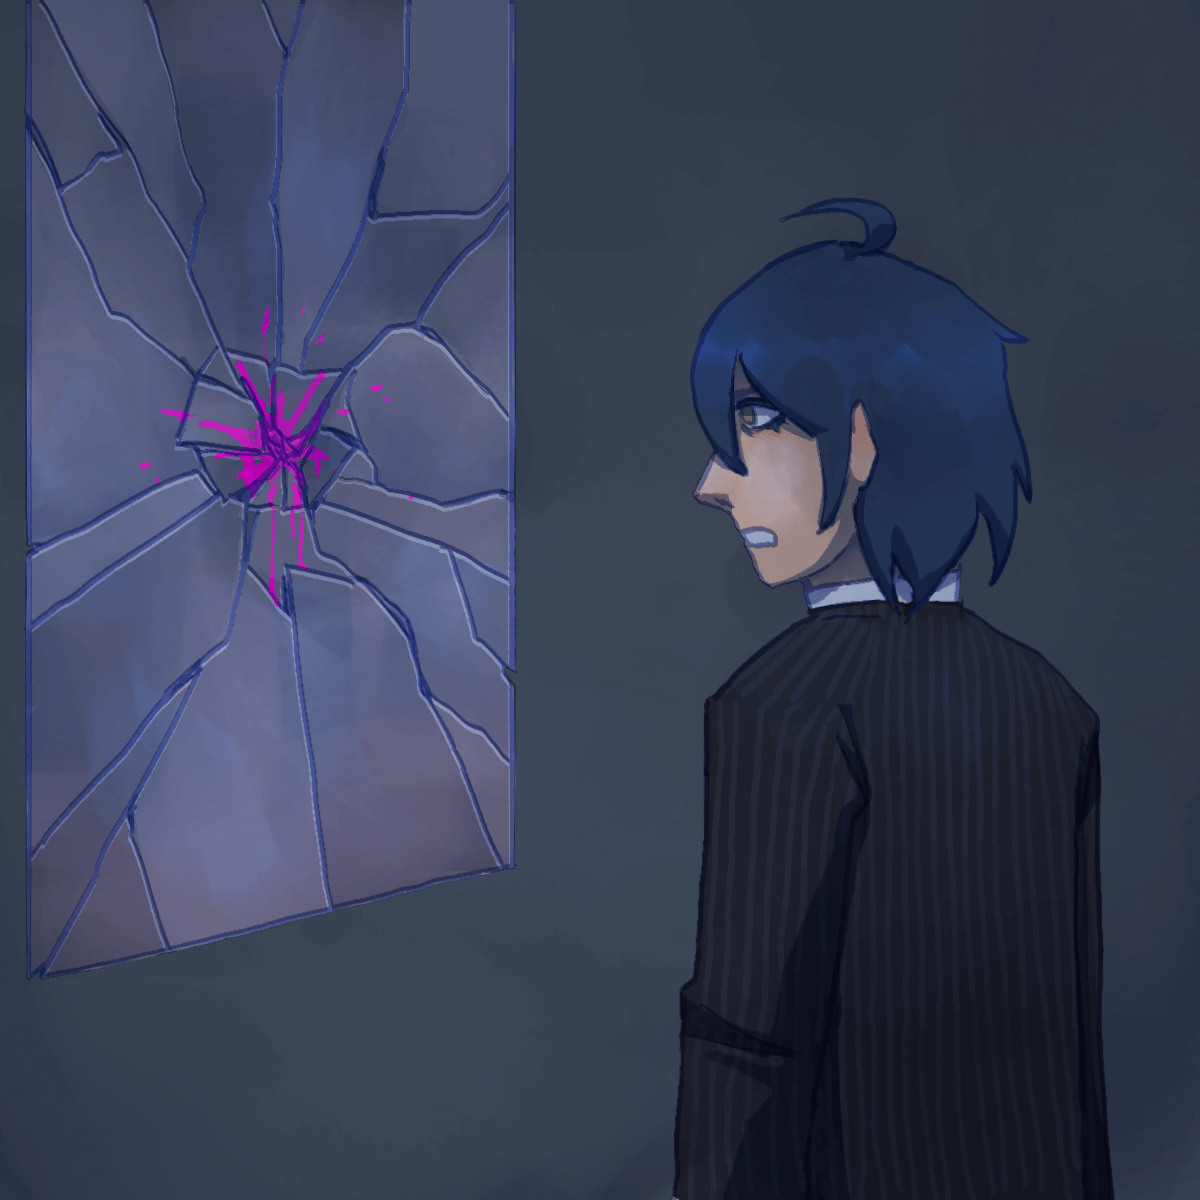 a drawing of post-game shuichi glaring at a shattered mirror with a splatter of
		blood in the center.